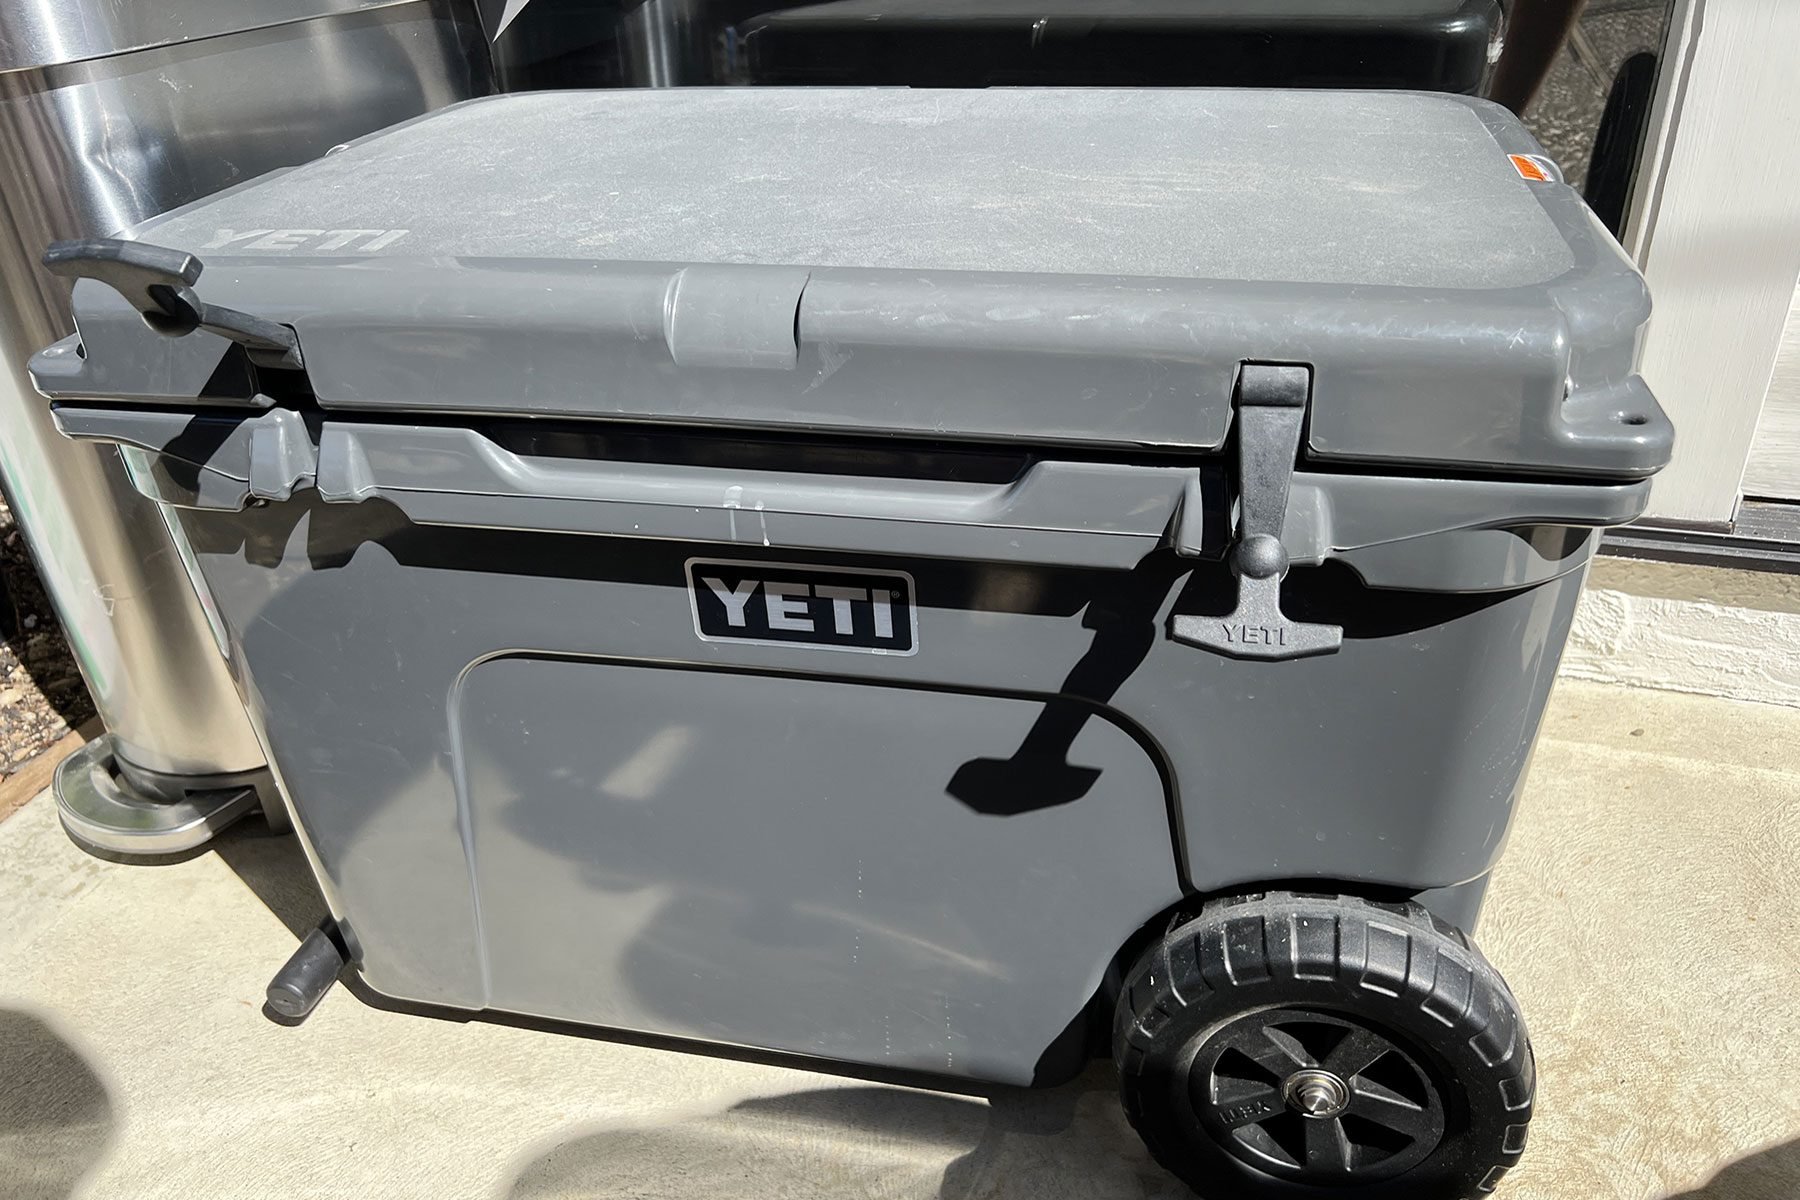 Yeti Recalls 1.9 Million Coolers and Cases—Here's What We Know